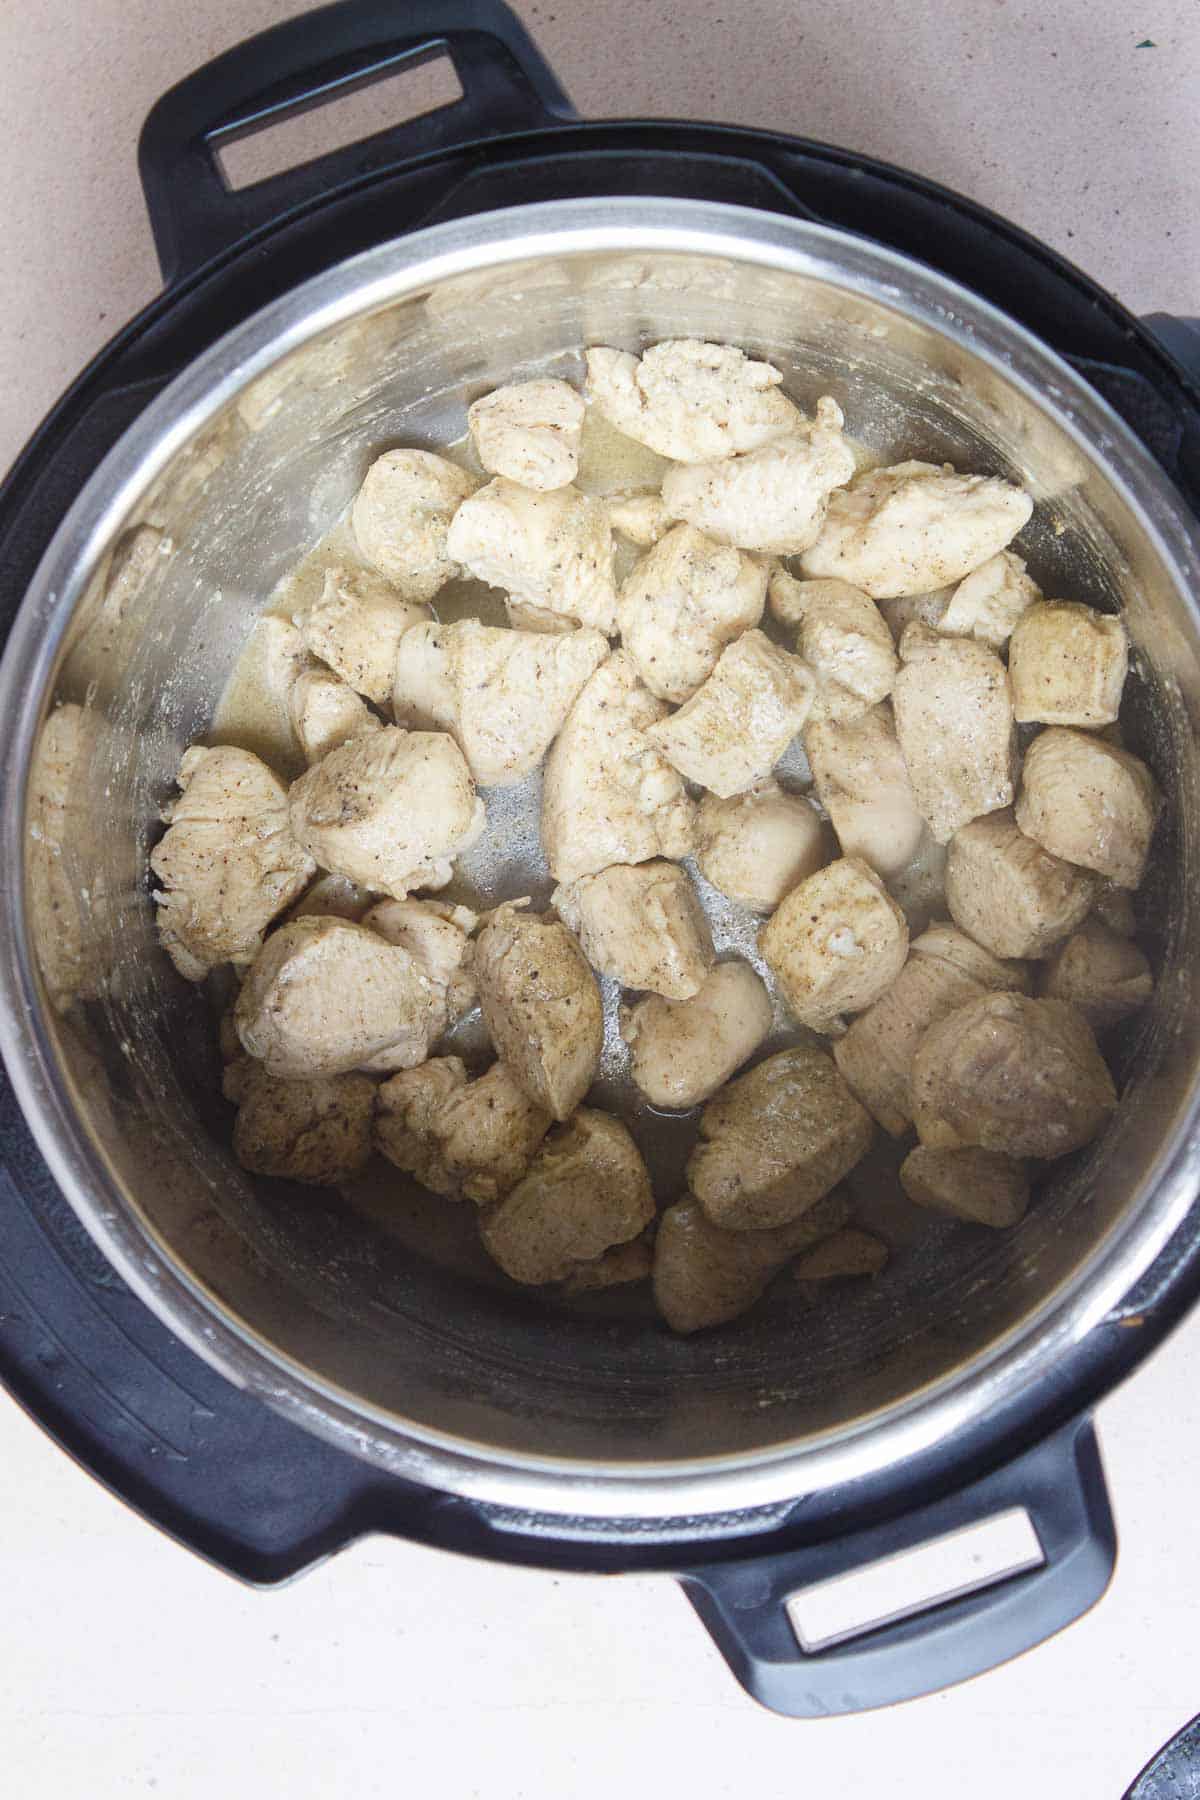 Diced chicken that has been browned in the Instant Pot